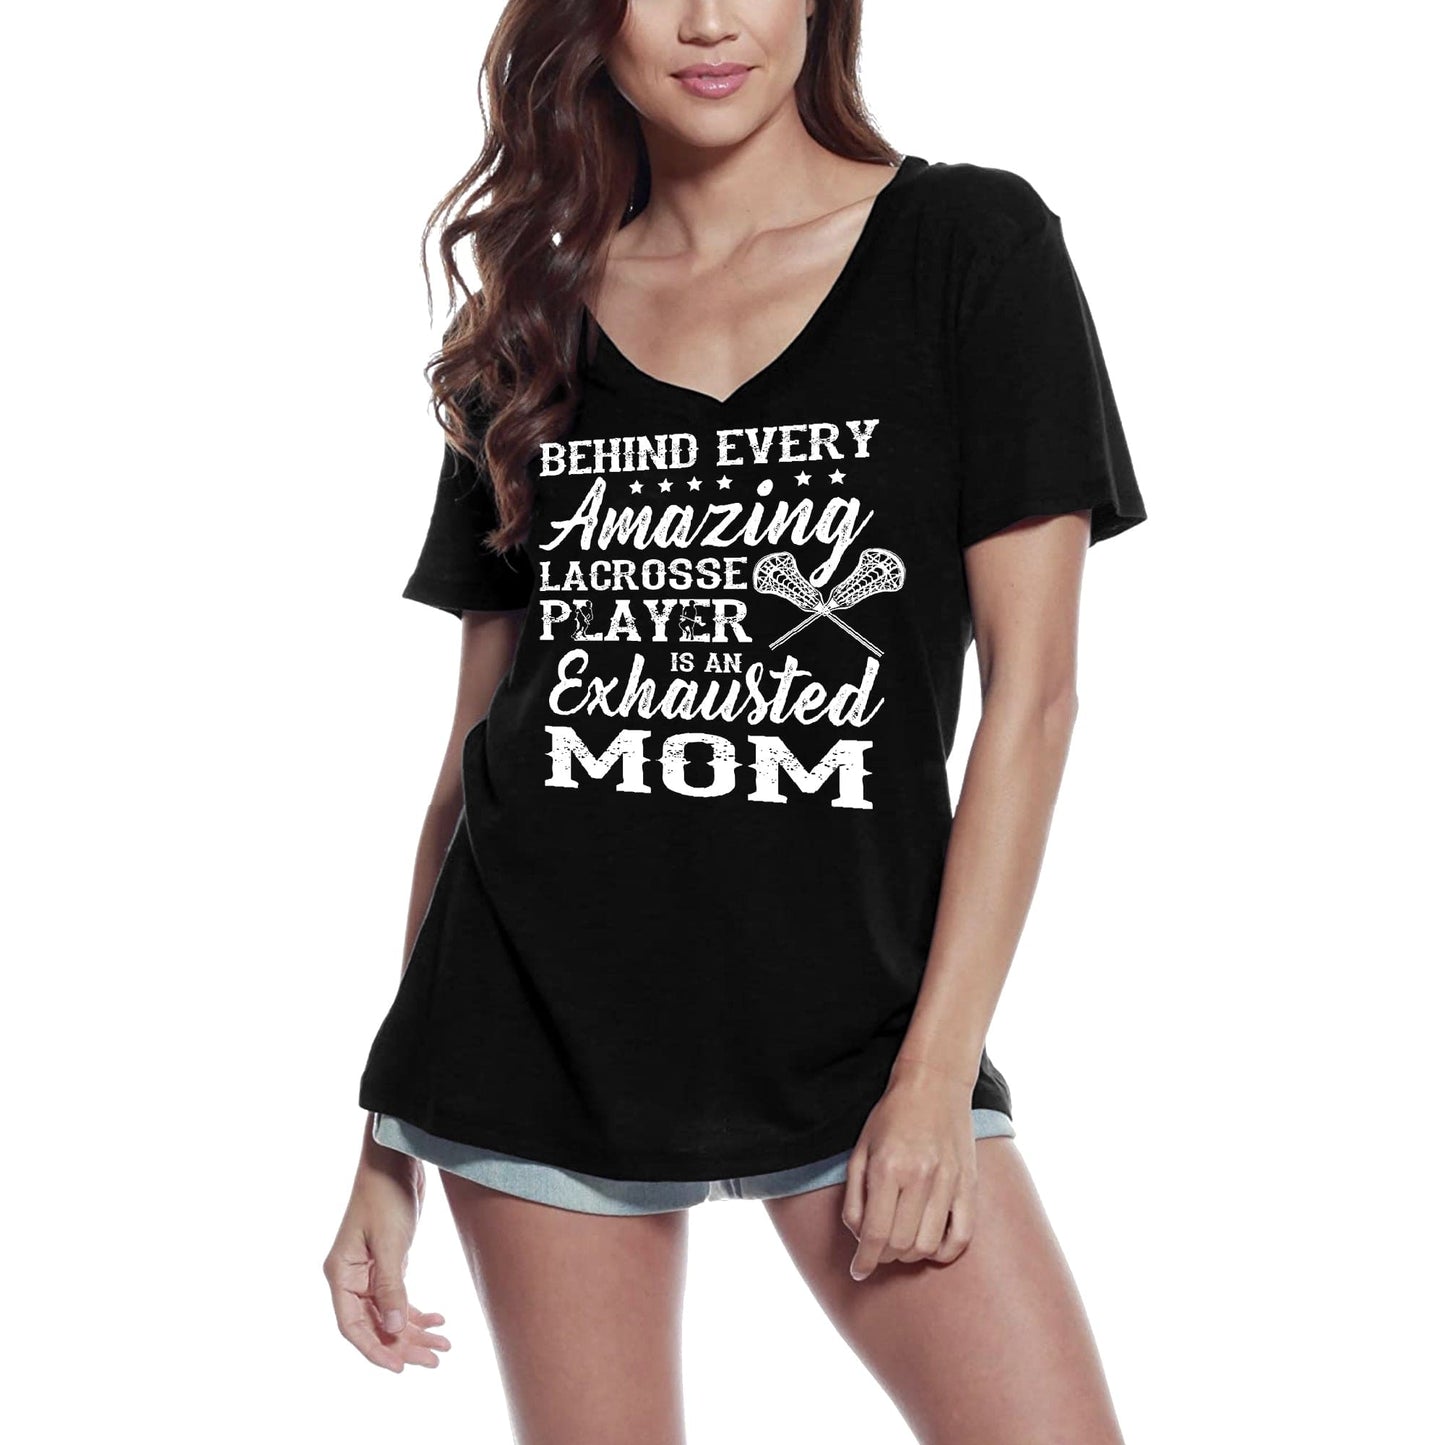 ULTRABASIC Women's T-Shirt Behind Every Amazing Lacrosse Player is an Exhausted Mom